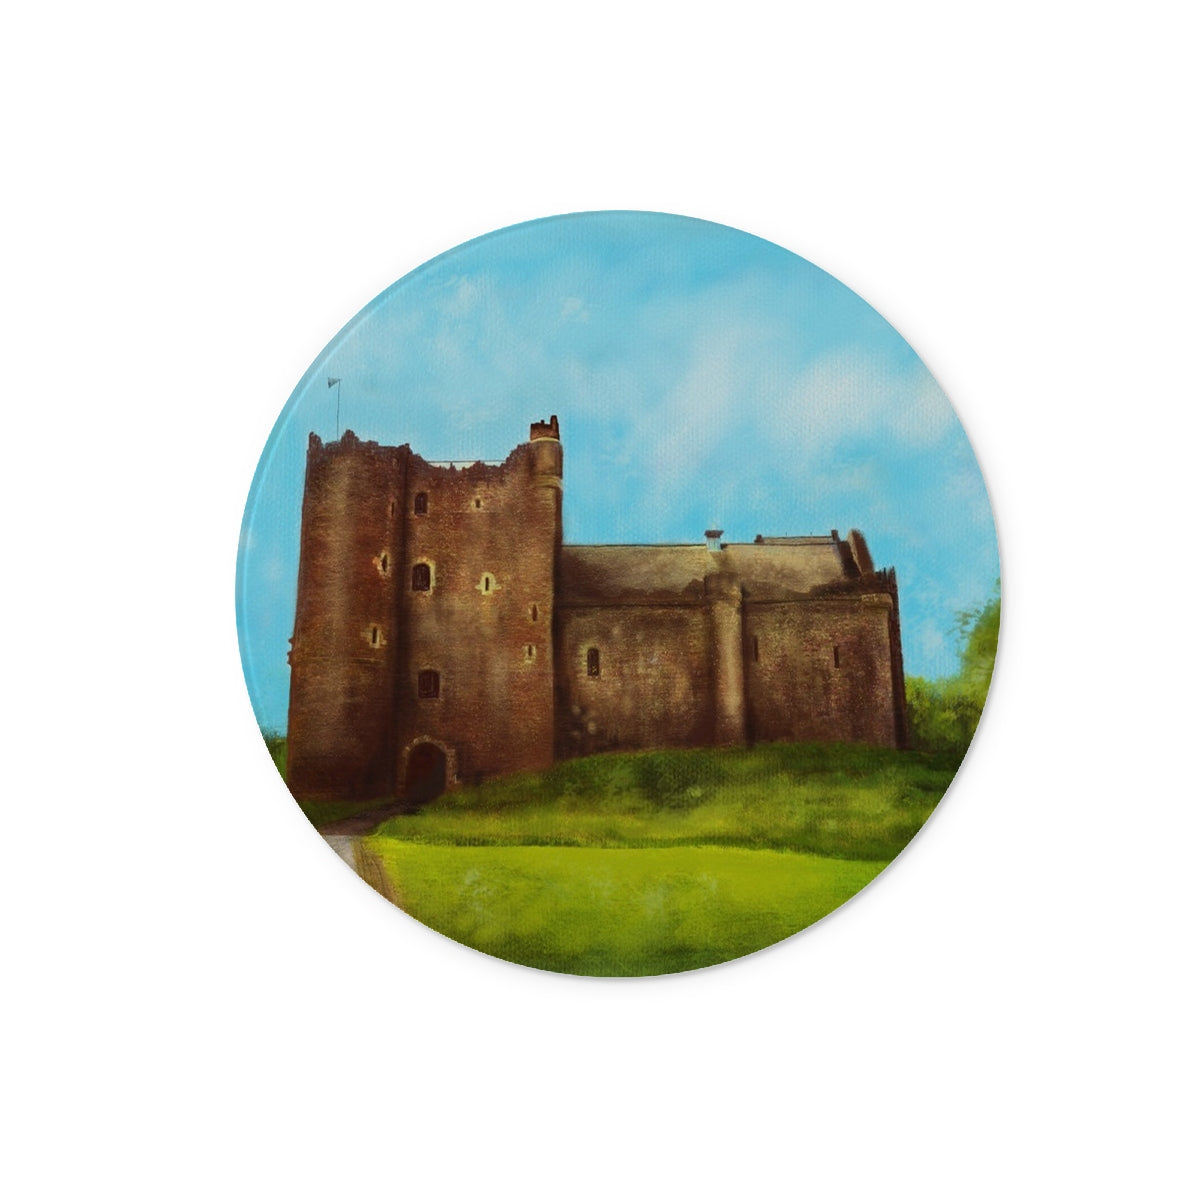 Doune Castle Art Gifts Glass Chopping Board-Glass Chopping Boards-Historic & Iconic Scotland Art Gallery-12" Round-Paintings, Prints, Homeware, Art Gifts From Scotland By Scottish Artist Kevin Hunter